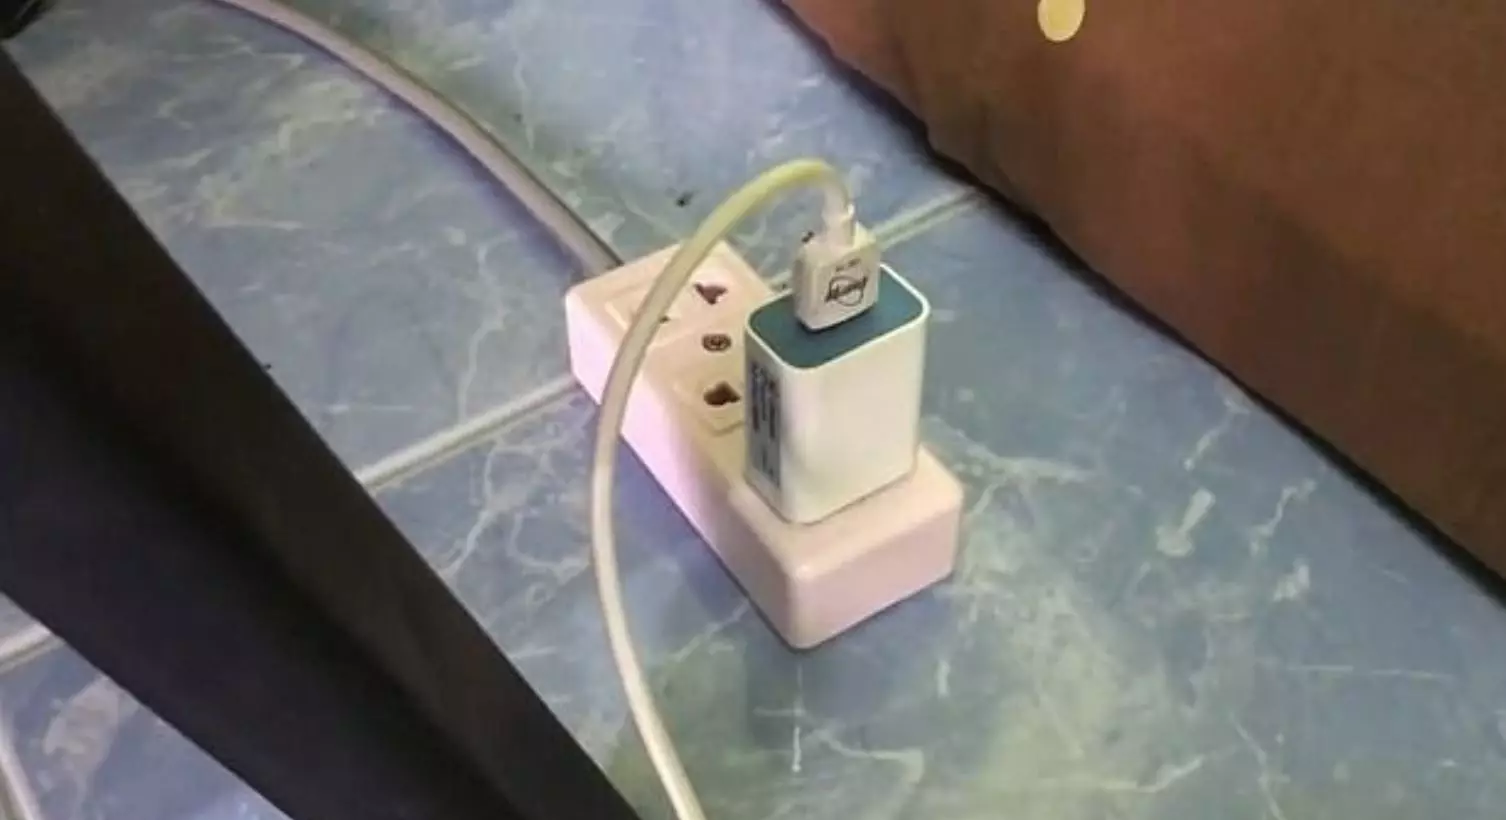 The phone was plugged into a charging point with a cheap charger.